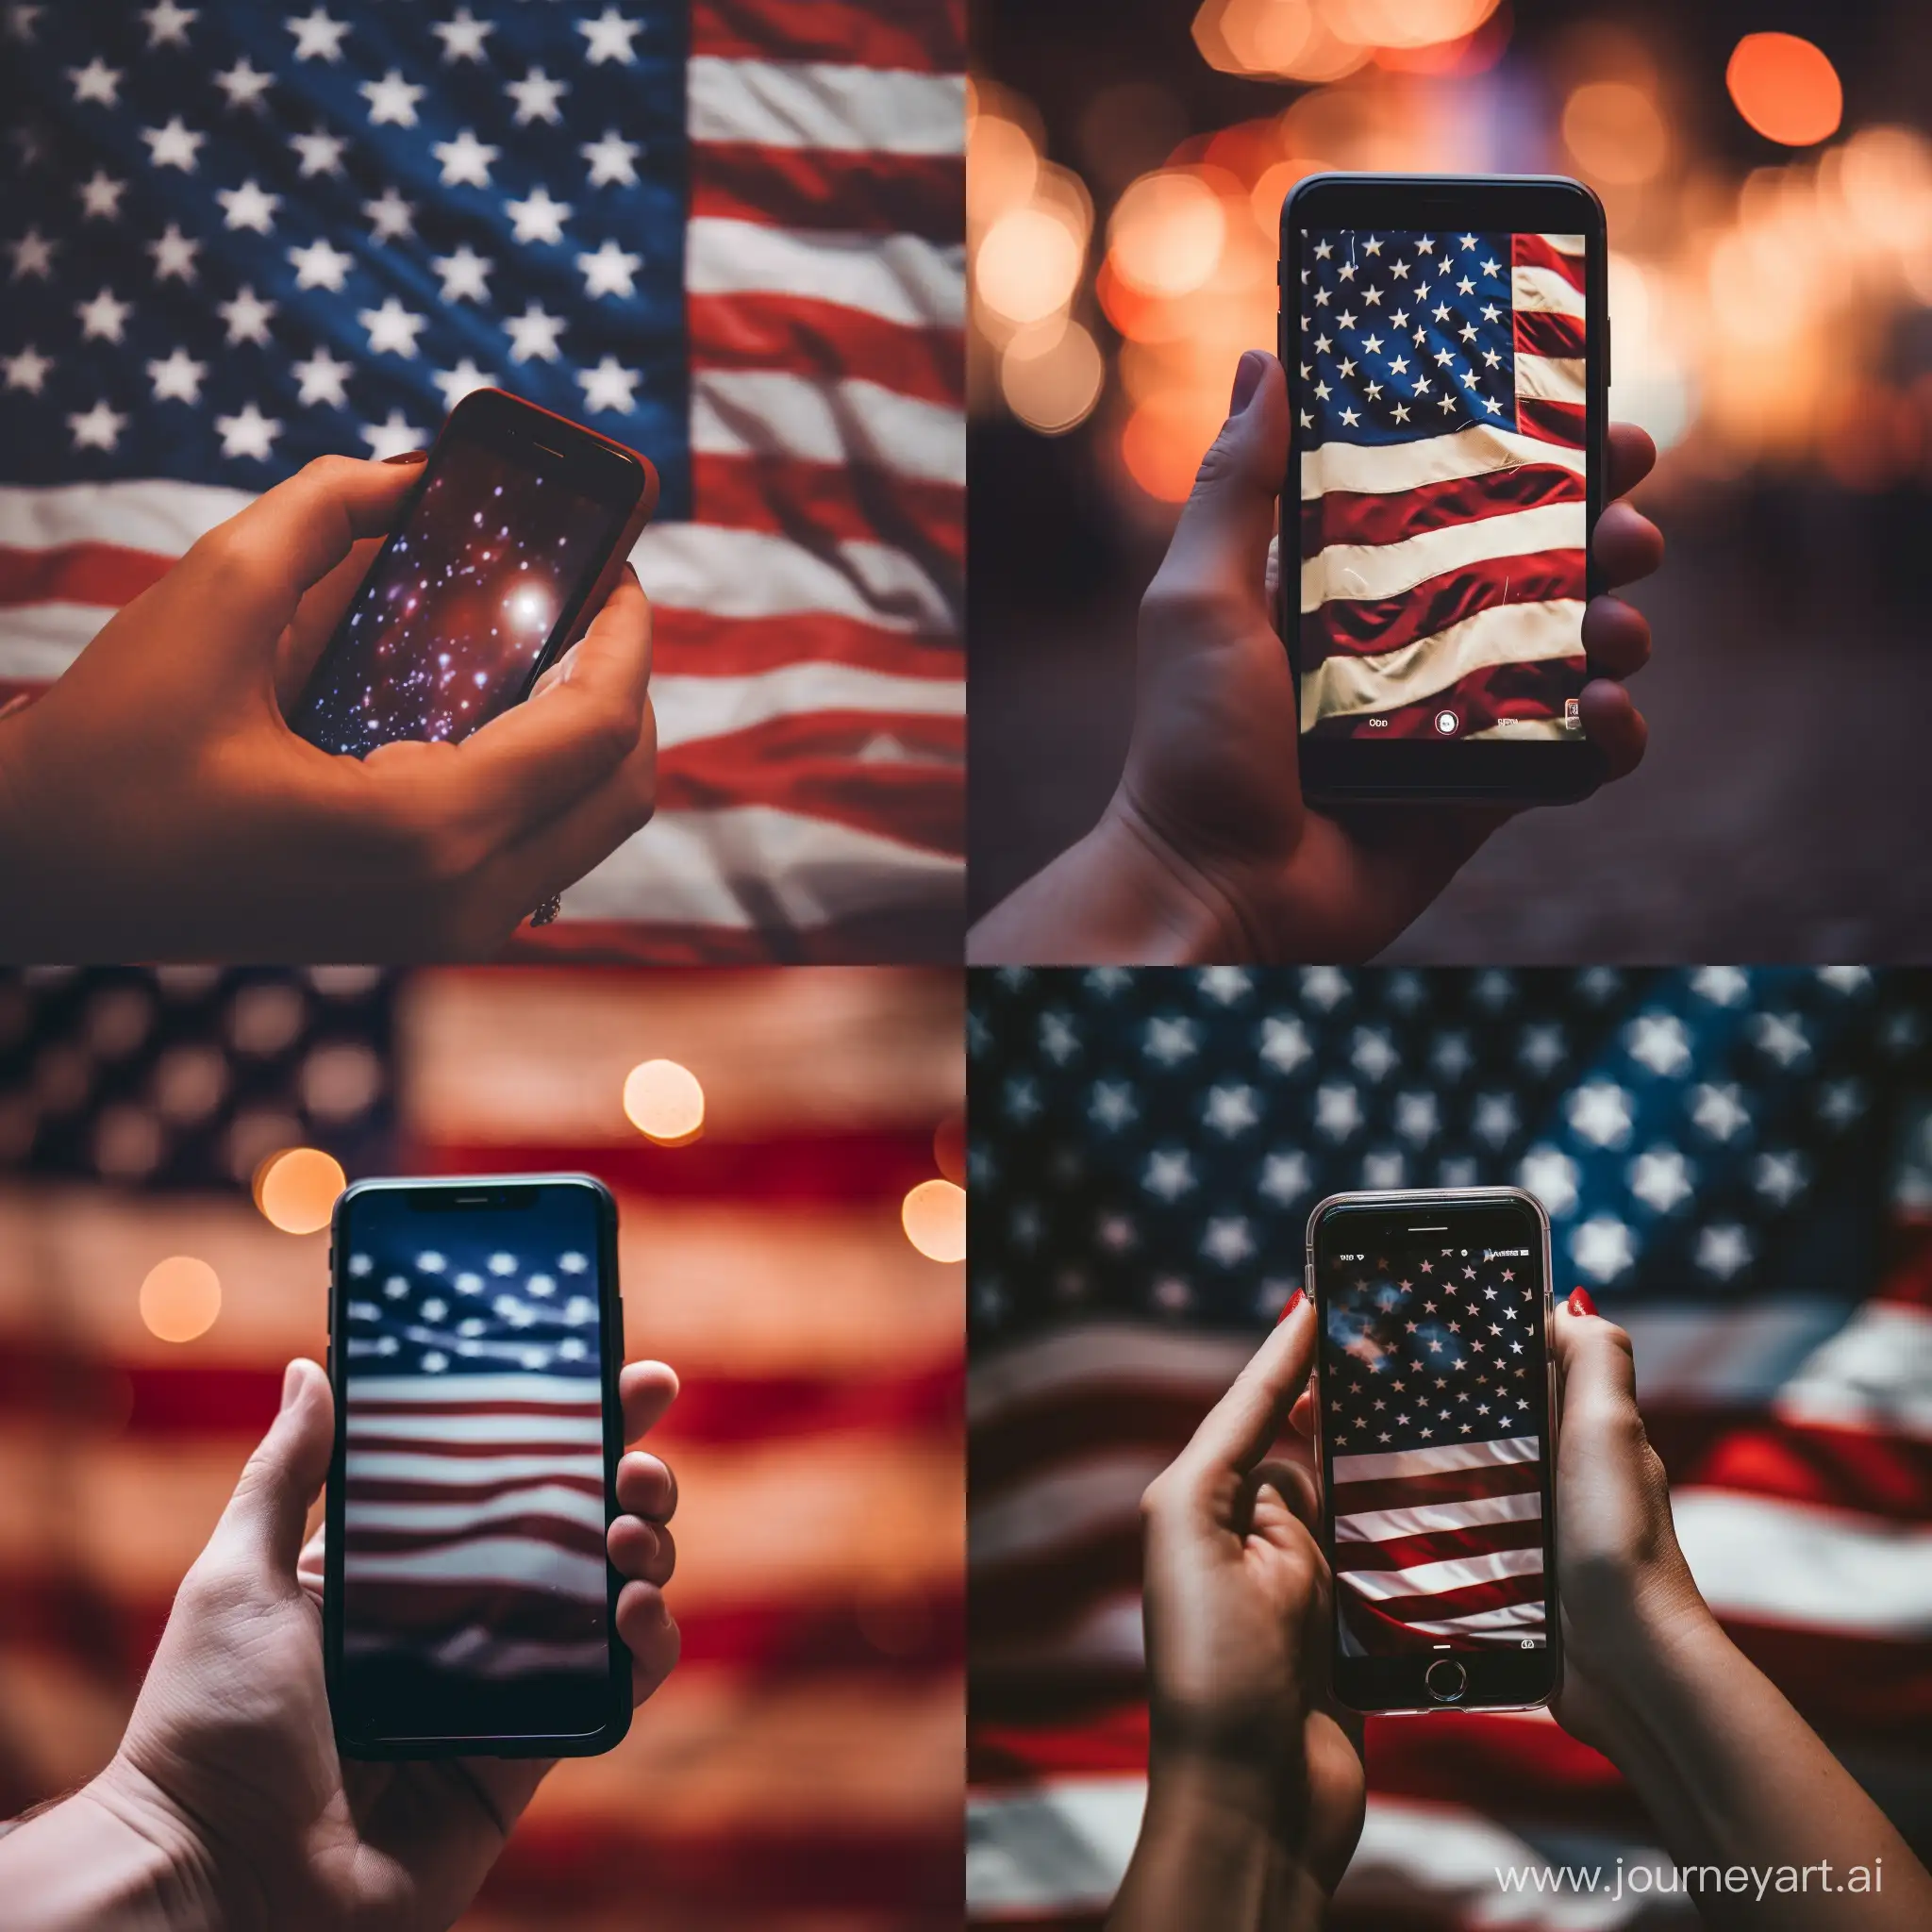 a hand holding the back of a phone, photography, blurry american flag in the background